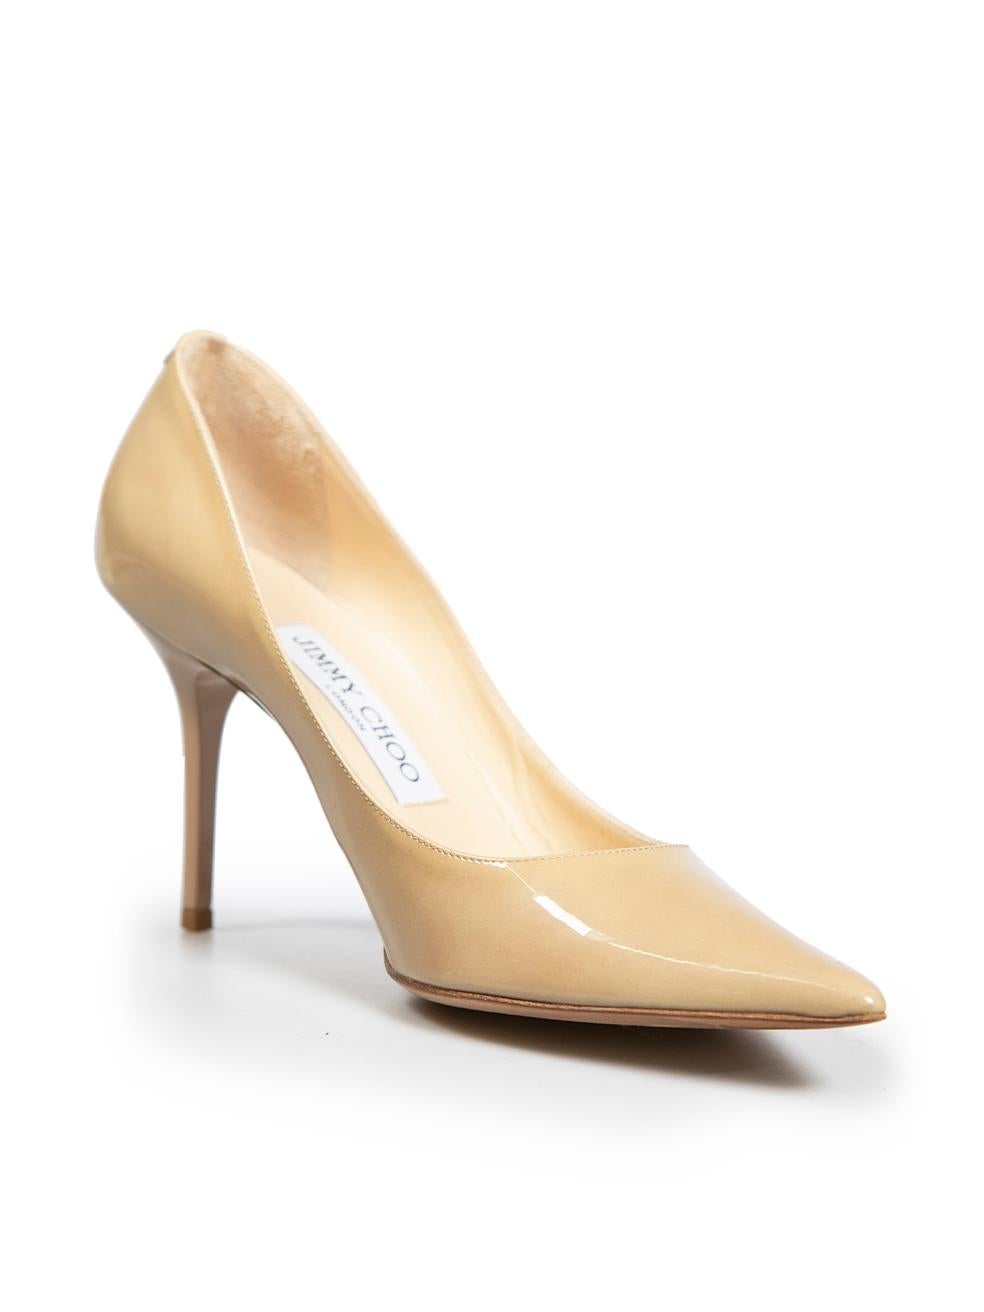 CONDITION is Very good. Minimal wear to heels is evident. Minimal small marks to patent leather at sides, back of heel and edge of pointed toe. There is a small scratch to the sole on this used Jimmy Choo designer resale item.
 
 
 
 Details
 
 
